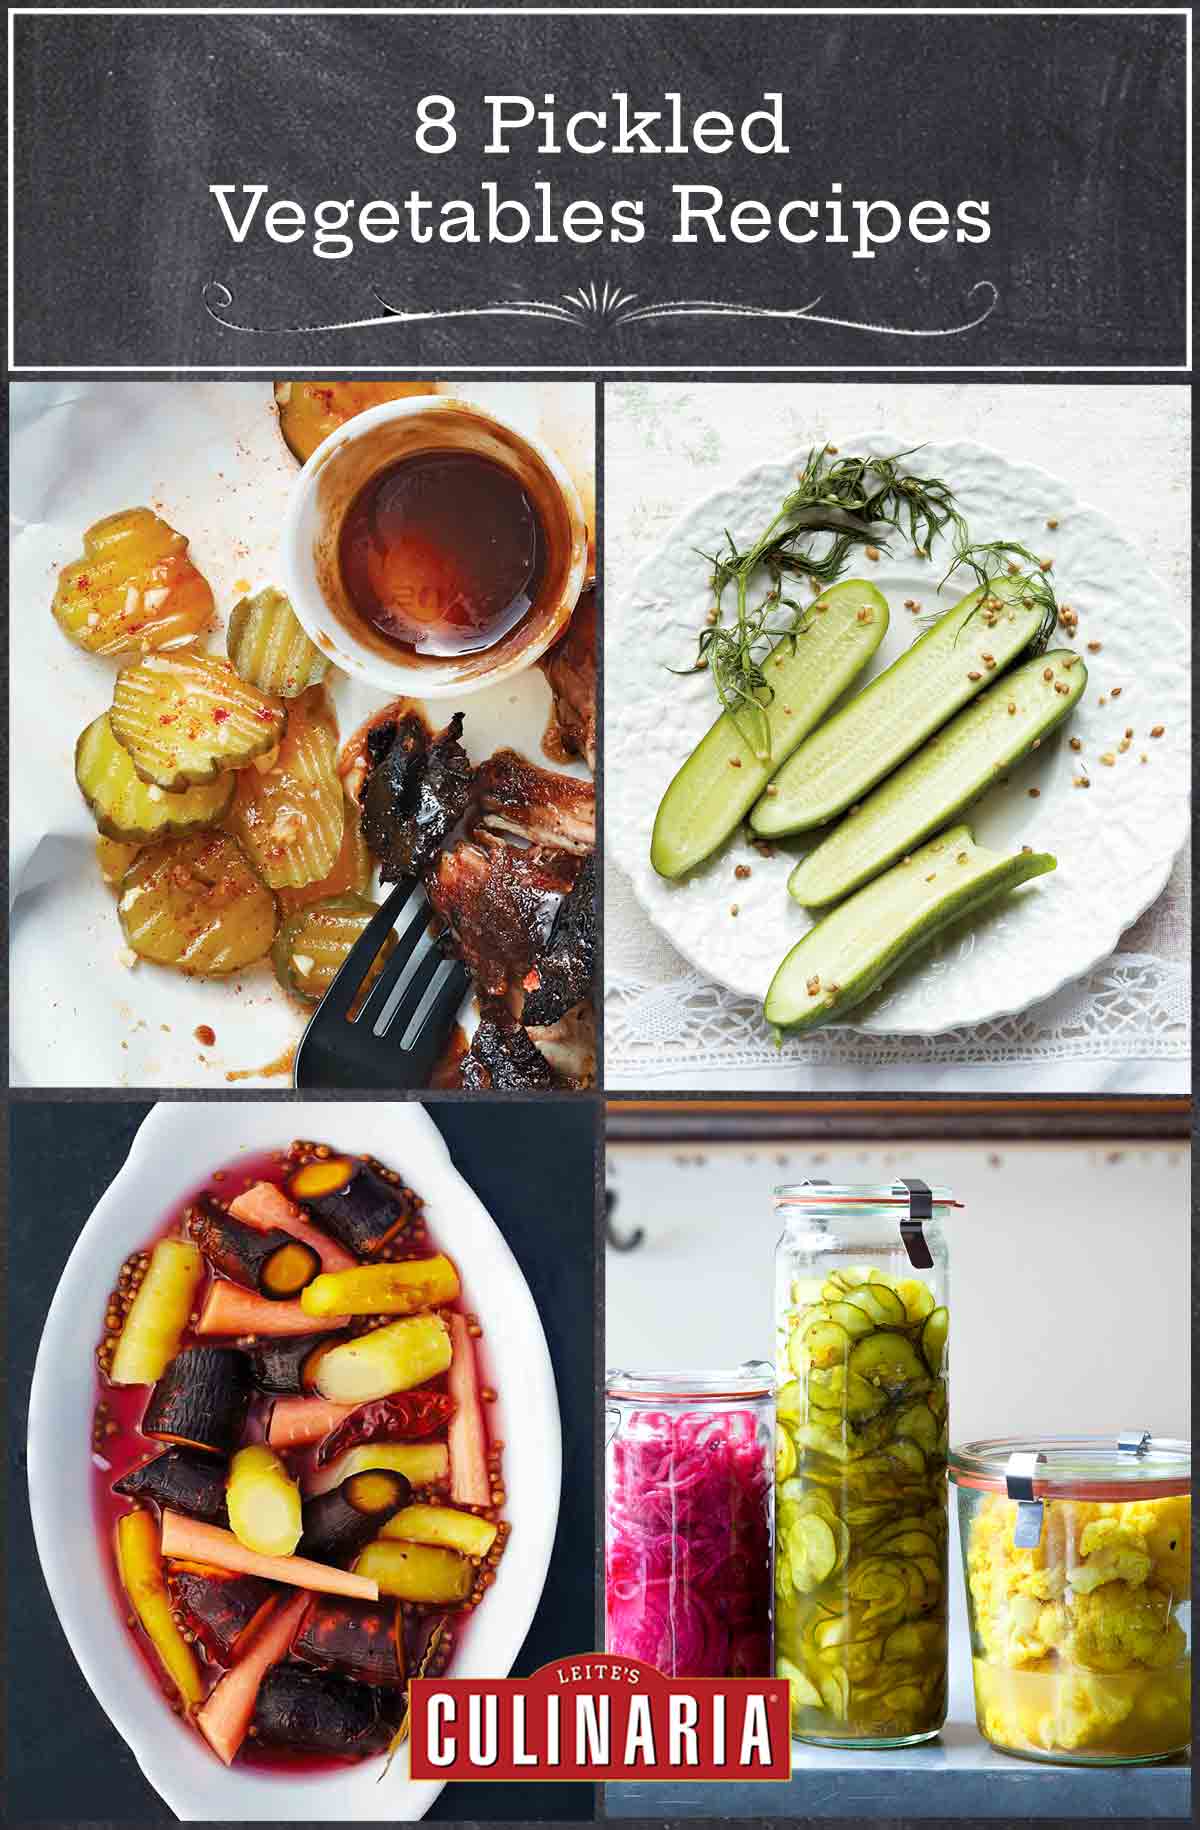 Images of bbq pickles, quick dill pickles, pickled carrots, and three jars of Israeli pickles.